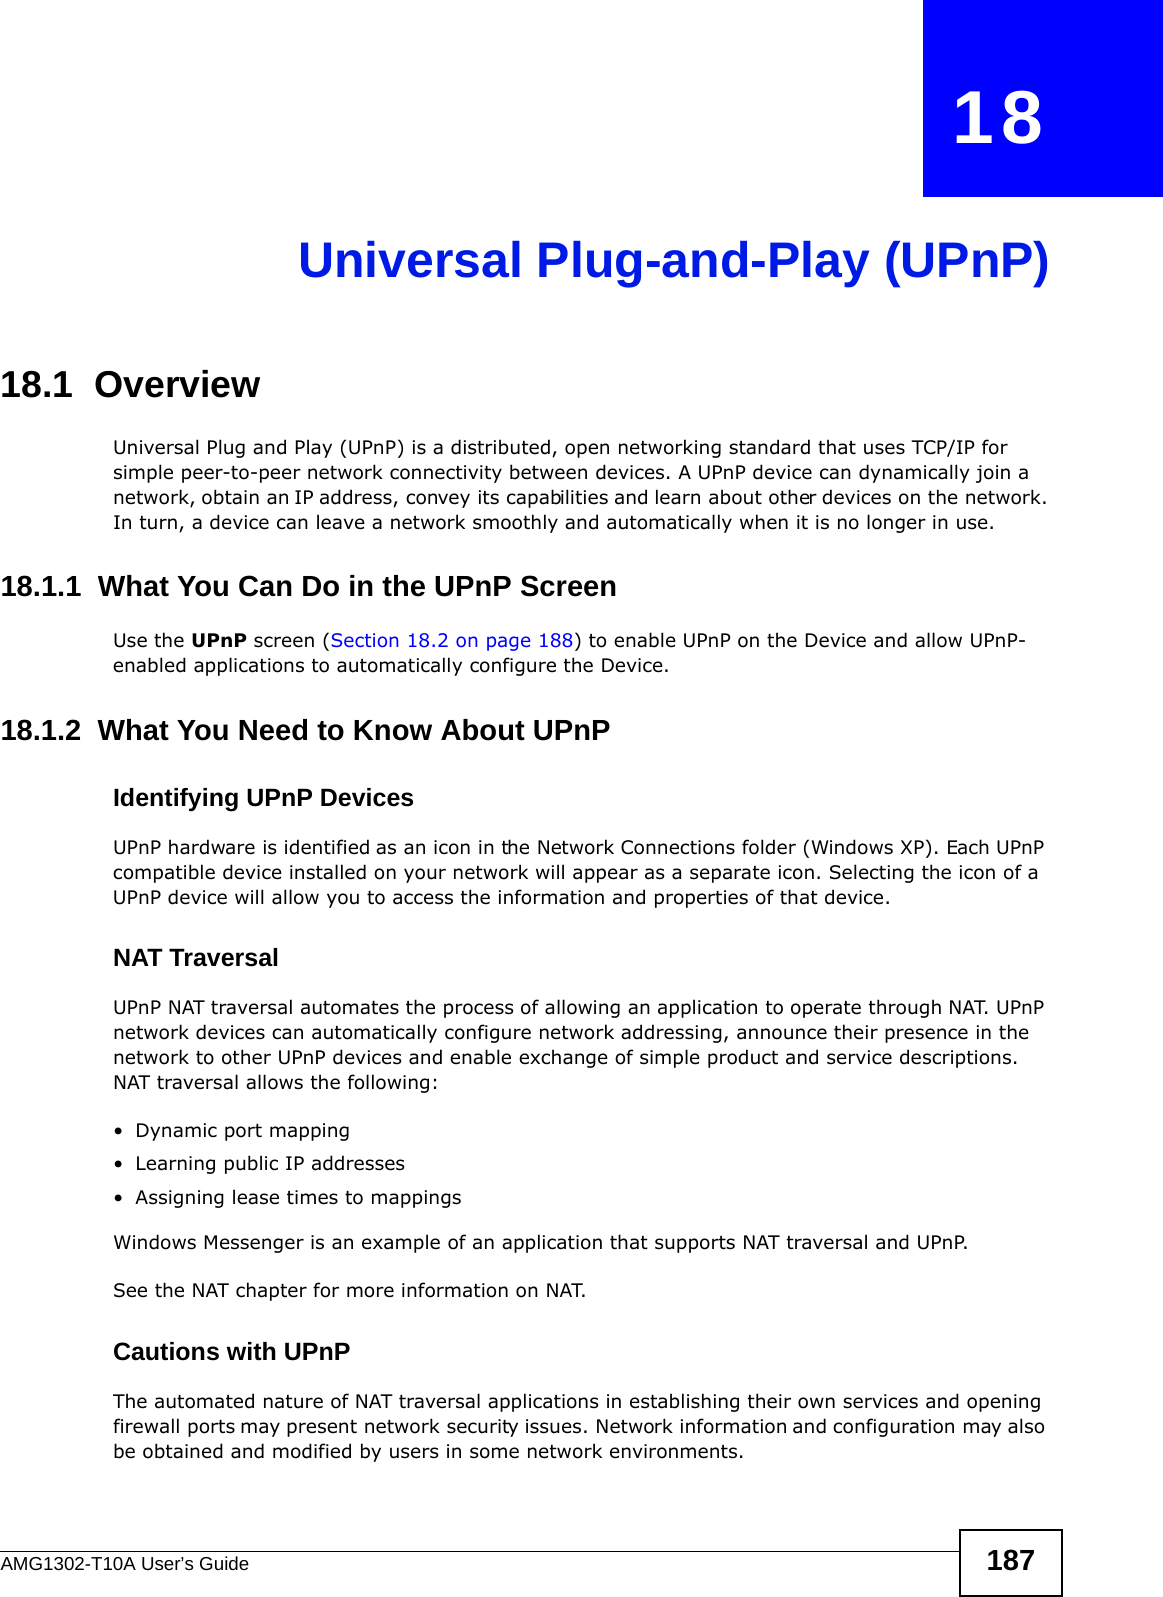 AMG1302-T10A User’s Guide 187CHAPTER   18Universal Plug-and-Play (UPnP)18.1  OverviewUniversal Plug and Play (UPnP) is a distributed, open networking standard that uses TCP/IP for simple peer-to-peer network connectivity between devices. A UPnP device can dynamically join a network, obtain an IP address, convey its capabilities and learn about other devices on the network. In turn, a device can leave a network smoothly and automatically when it is no longer in use.18.1.1  What You Can Do in the UPnP ScreenUse the UPnP screen (Section 18.2 on page 188) to enable UPnP on the Device and allow UPnP-enabled applications to automatically configure the Device.18.1.2  What You Need to Know About UPnPIdentifying UPnP DevicesUPnP hardware is identified as an icon in the Network Connections folder (Windows XP). Each UPnP compatible device installed on your network will appear as a separate icon. Selecting the icon of a UPnP device will allow you to access the information and properties of that device. NAT TraversalUPnP NAT traversal automates the process of allowing an application to operate through NAT. UPnP network devices can automatically configure network addressing, announce their presence in the network to other UPnP devices and enable exchange of simple product and service descriptions. NAT traversal allows the following:• Dynamic port mapping• Learning public IP addresses• Assigning lease times to mappingsWindows Messenger is an example of an application that supports NAT traversal and UPnP. See the NAT chapter for more information on NAT.Cautions with UPnPThe automated nature of NAT traversal applications in establishing their own services and opening firewall ports may present network security issues. Network information and configuration may also be obtained and modified by users in some network environments. 